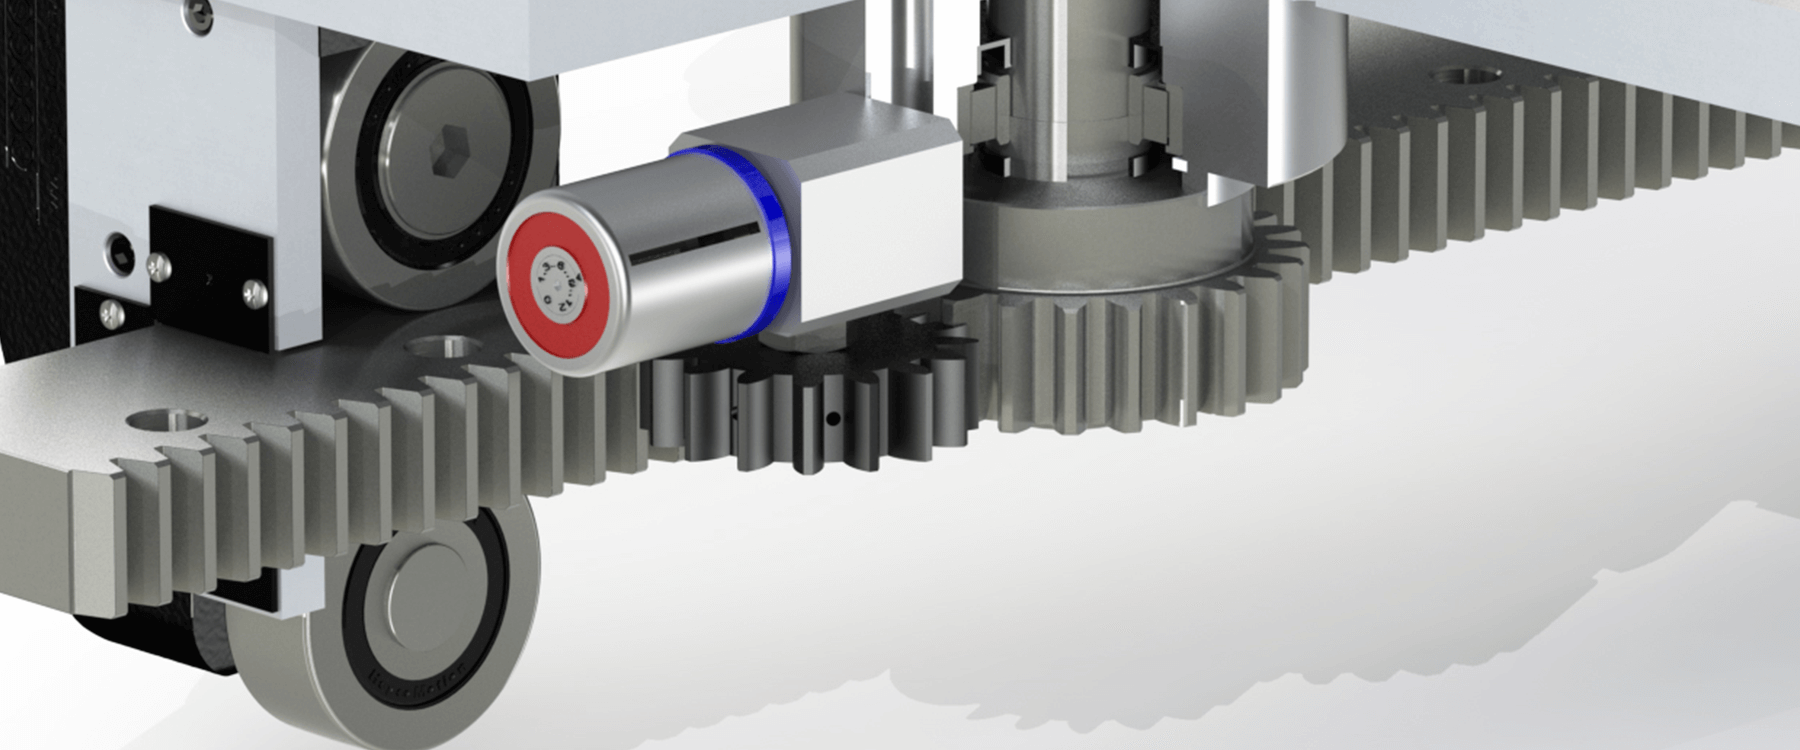 MHD Track Roller Linear Motion System Close Up